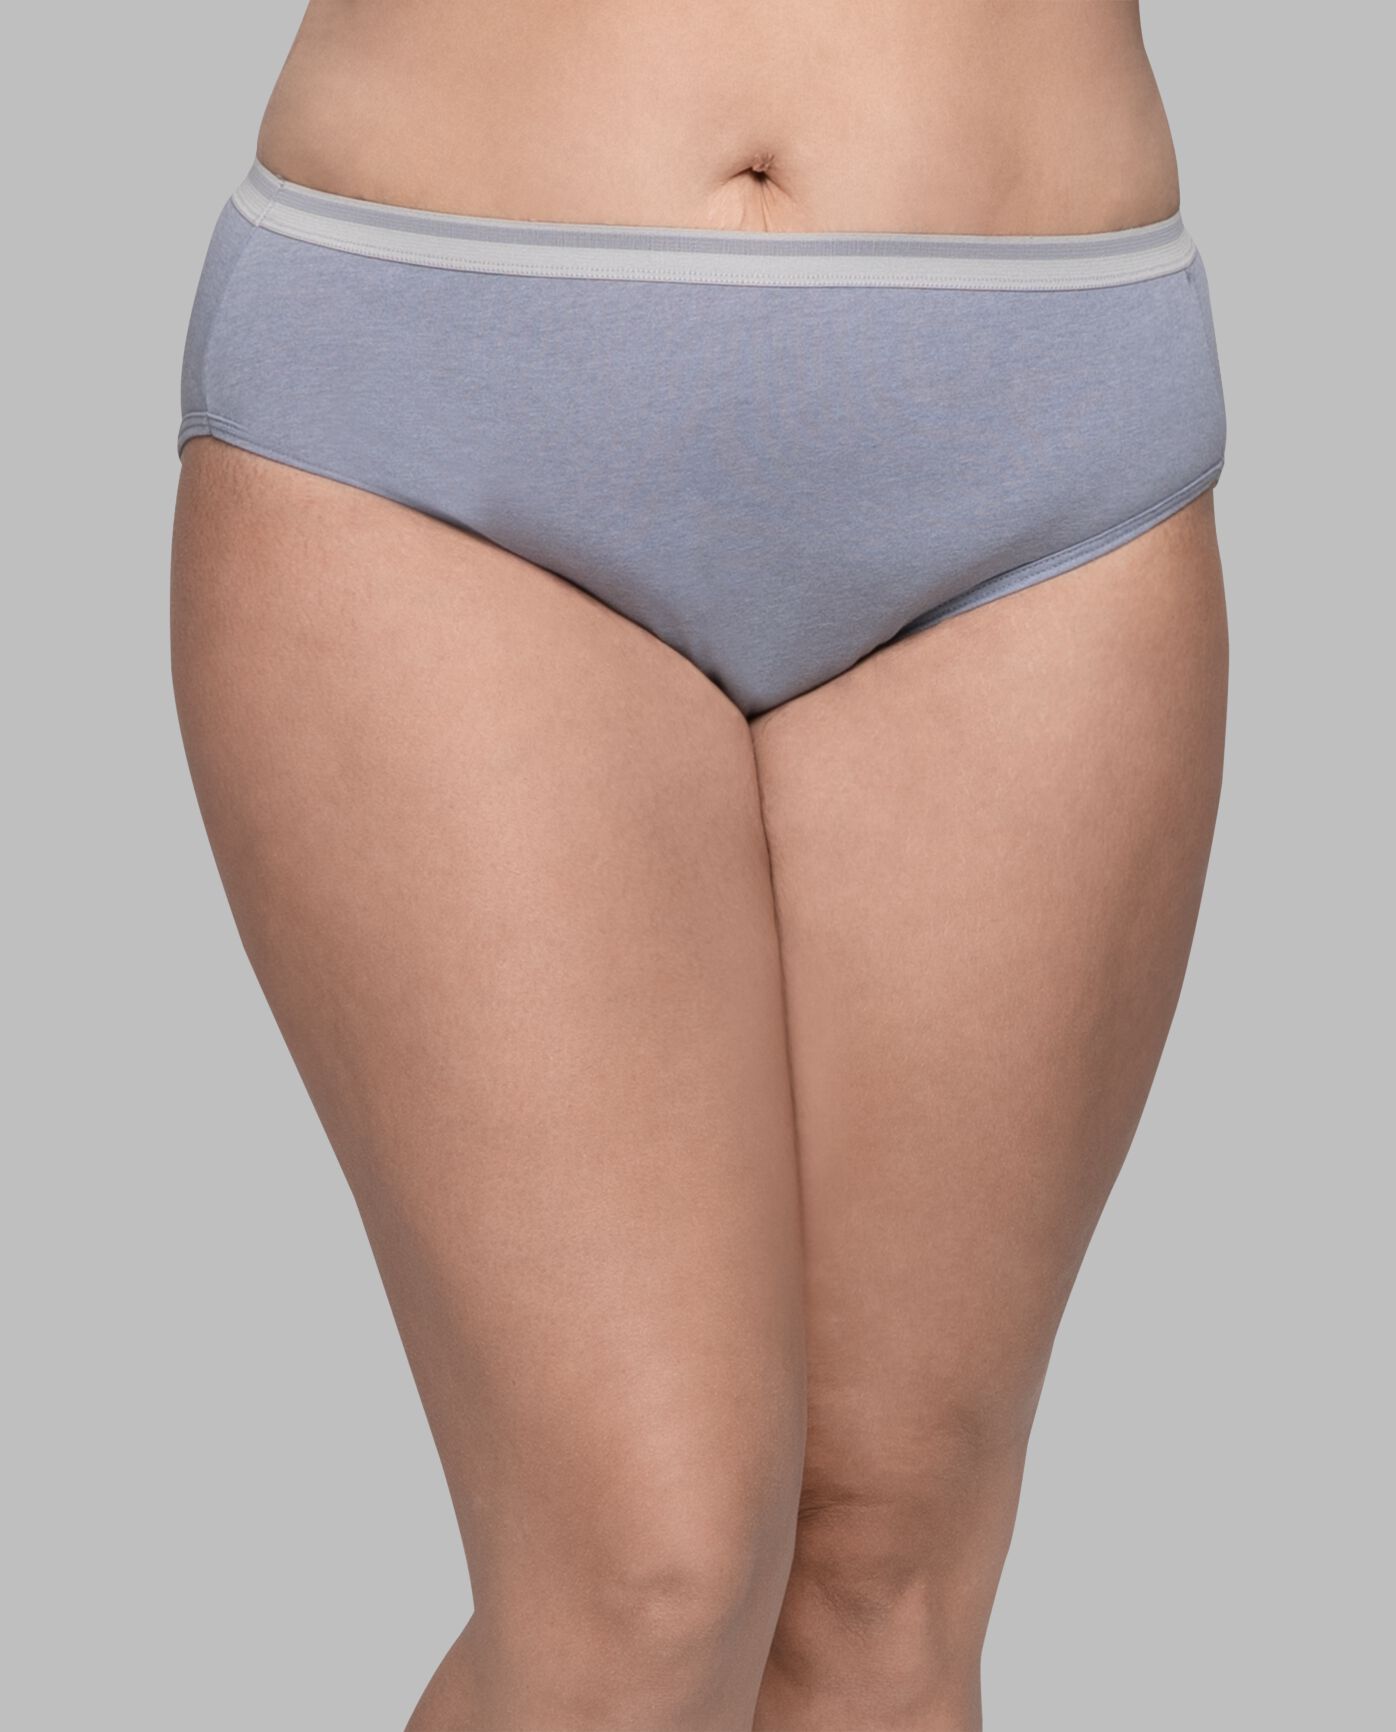 Fruit of the Loom Women's Fit for Me Plus Size Cotton Brief Panties